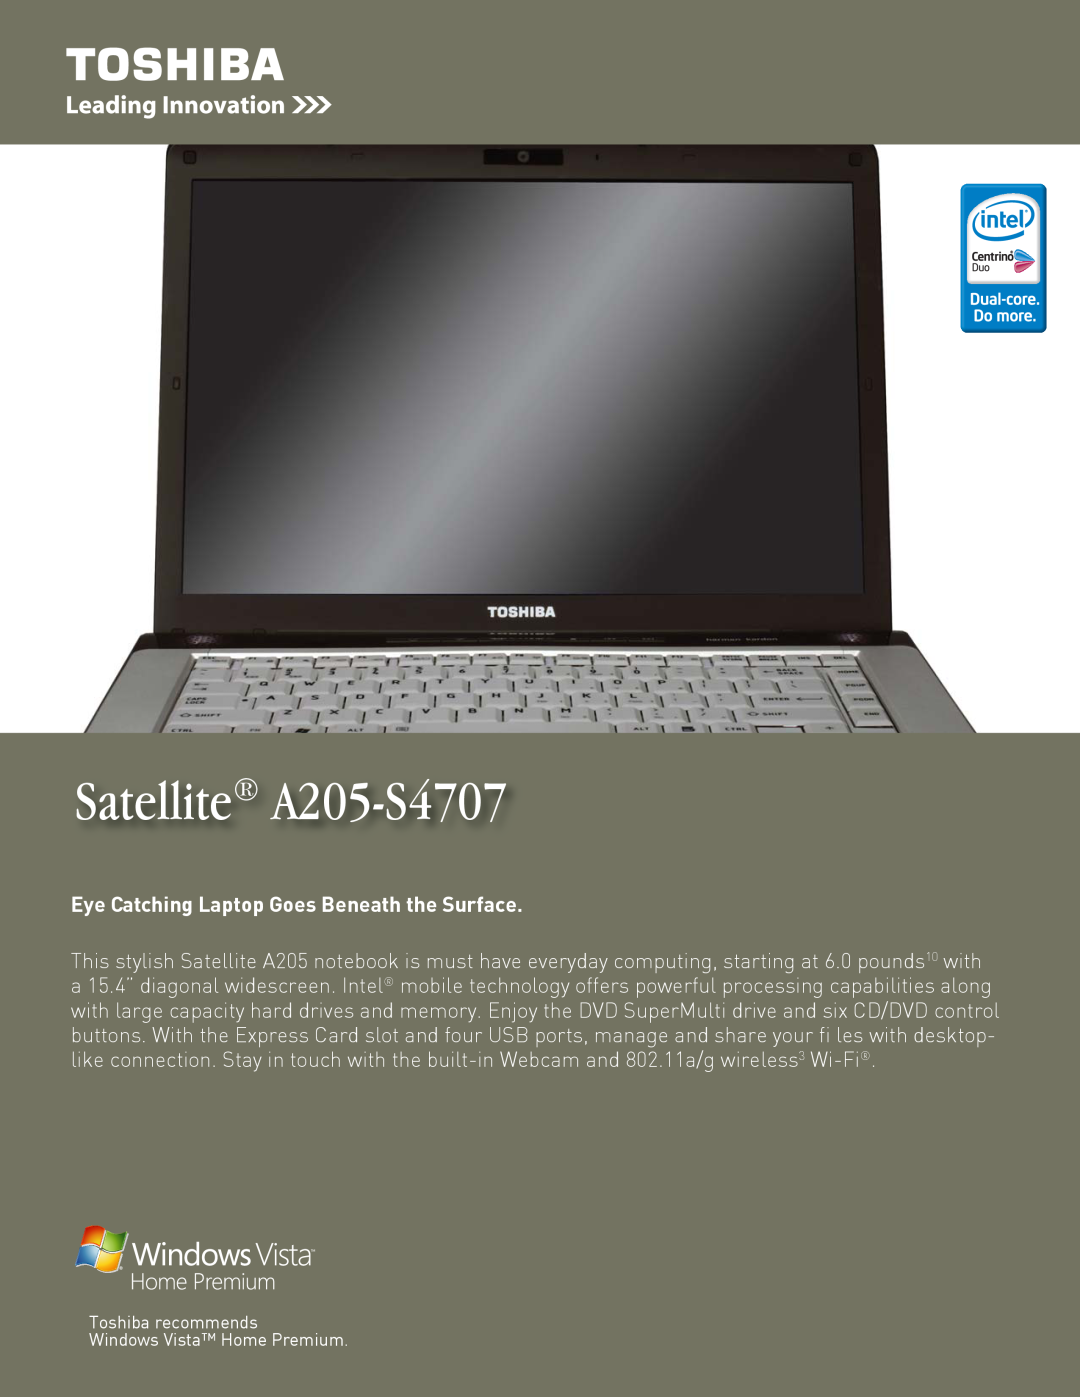 Toshiba manual Satellite A205-S4707, Eye Catching Laptop Goes Beneath the Surface 